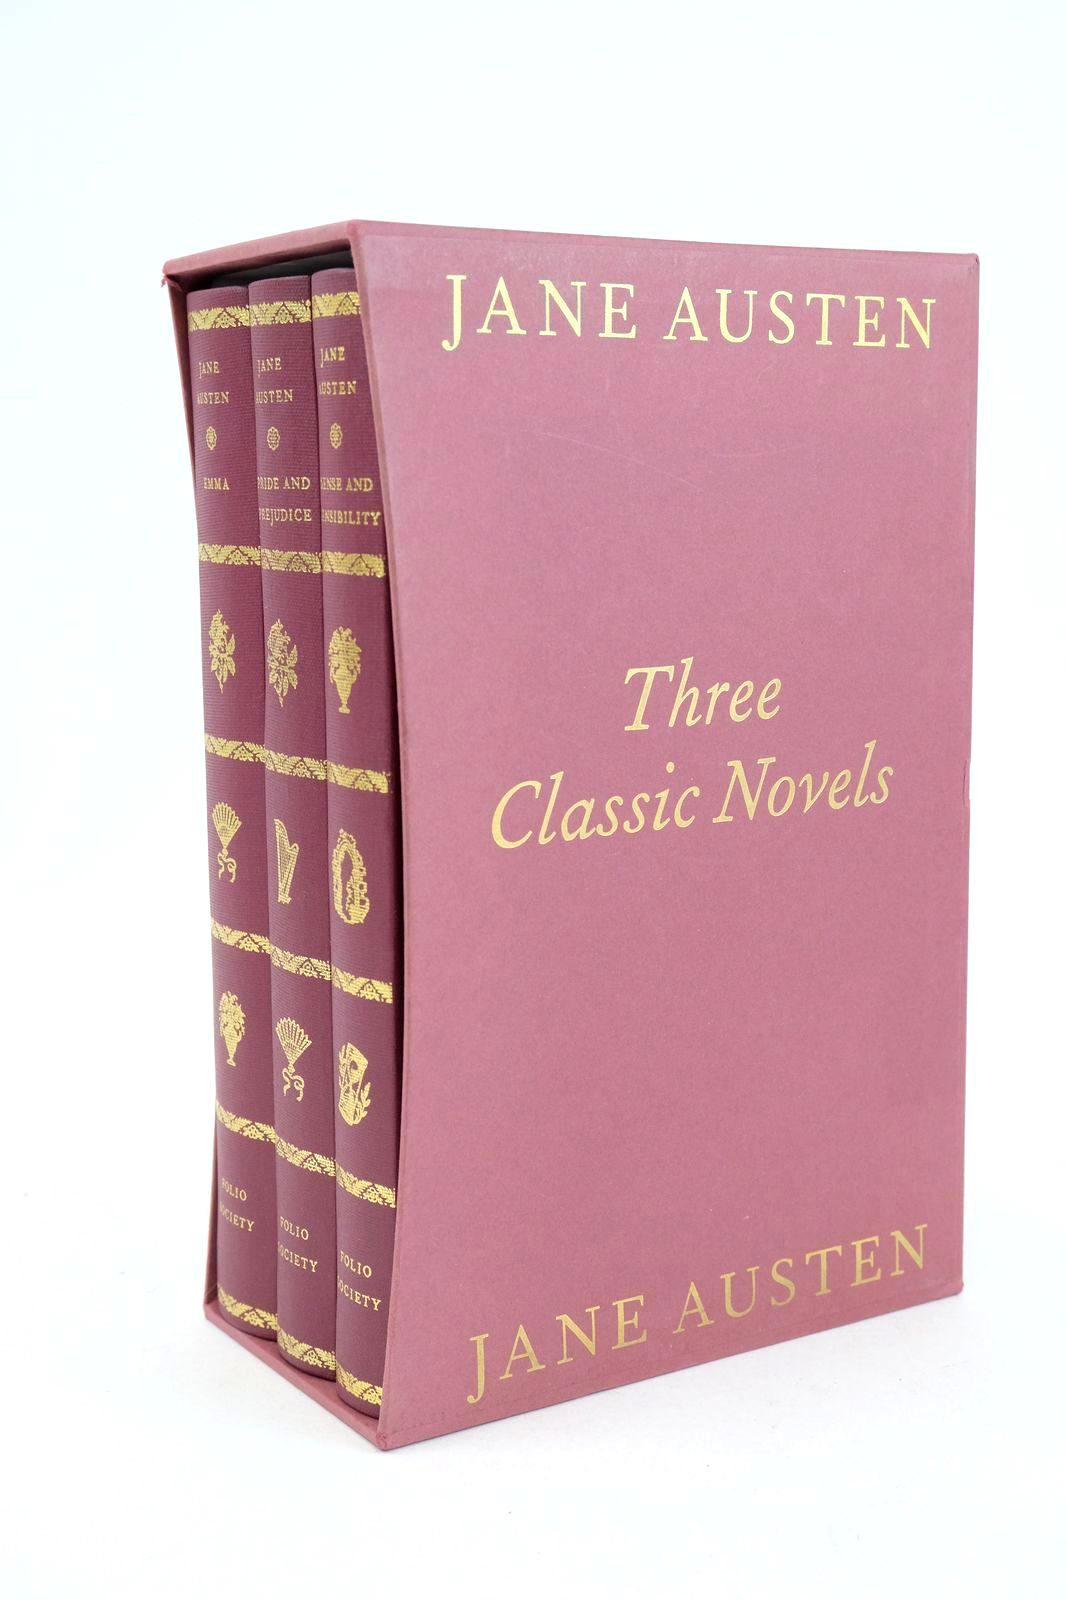 Photo of THREE CLASSIC NOVELS written by Austen, Jane illustrated by Hassall, Joan published by Folio Society (STOCK CODE: 1325651)  for sale by Stella & Rose's Books